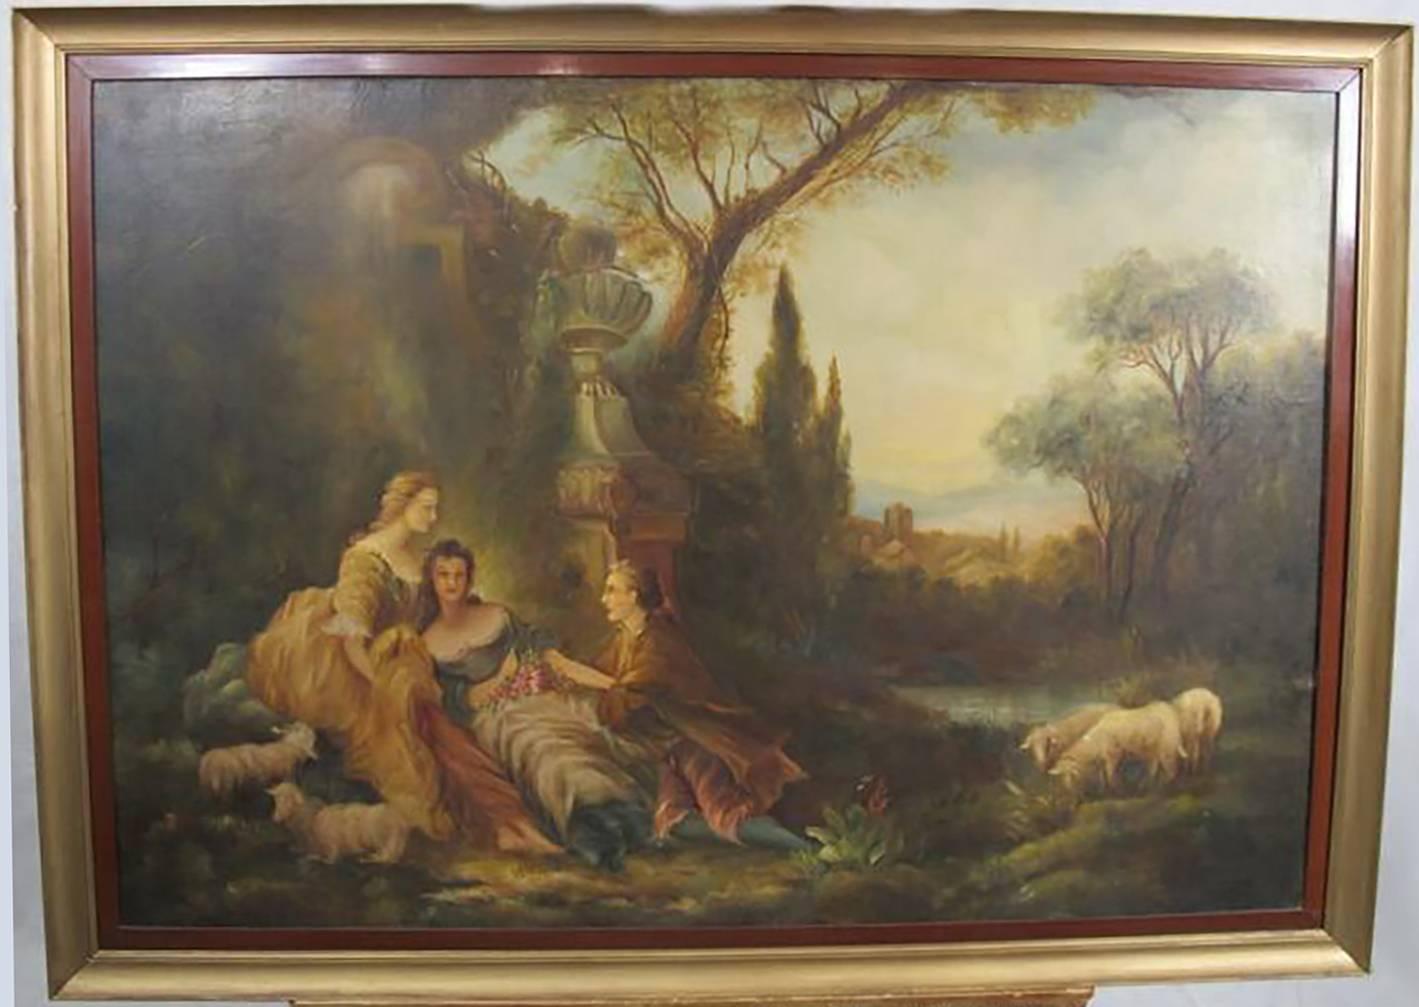 Unknown Landscape Painting - In the Manner of Nicolas Lancret – Large 18th Century Rococo Oil Painting